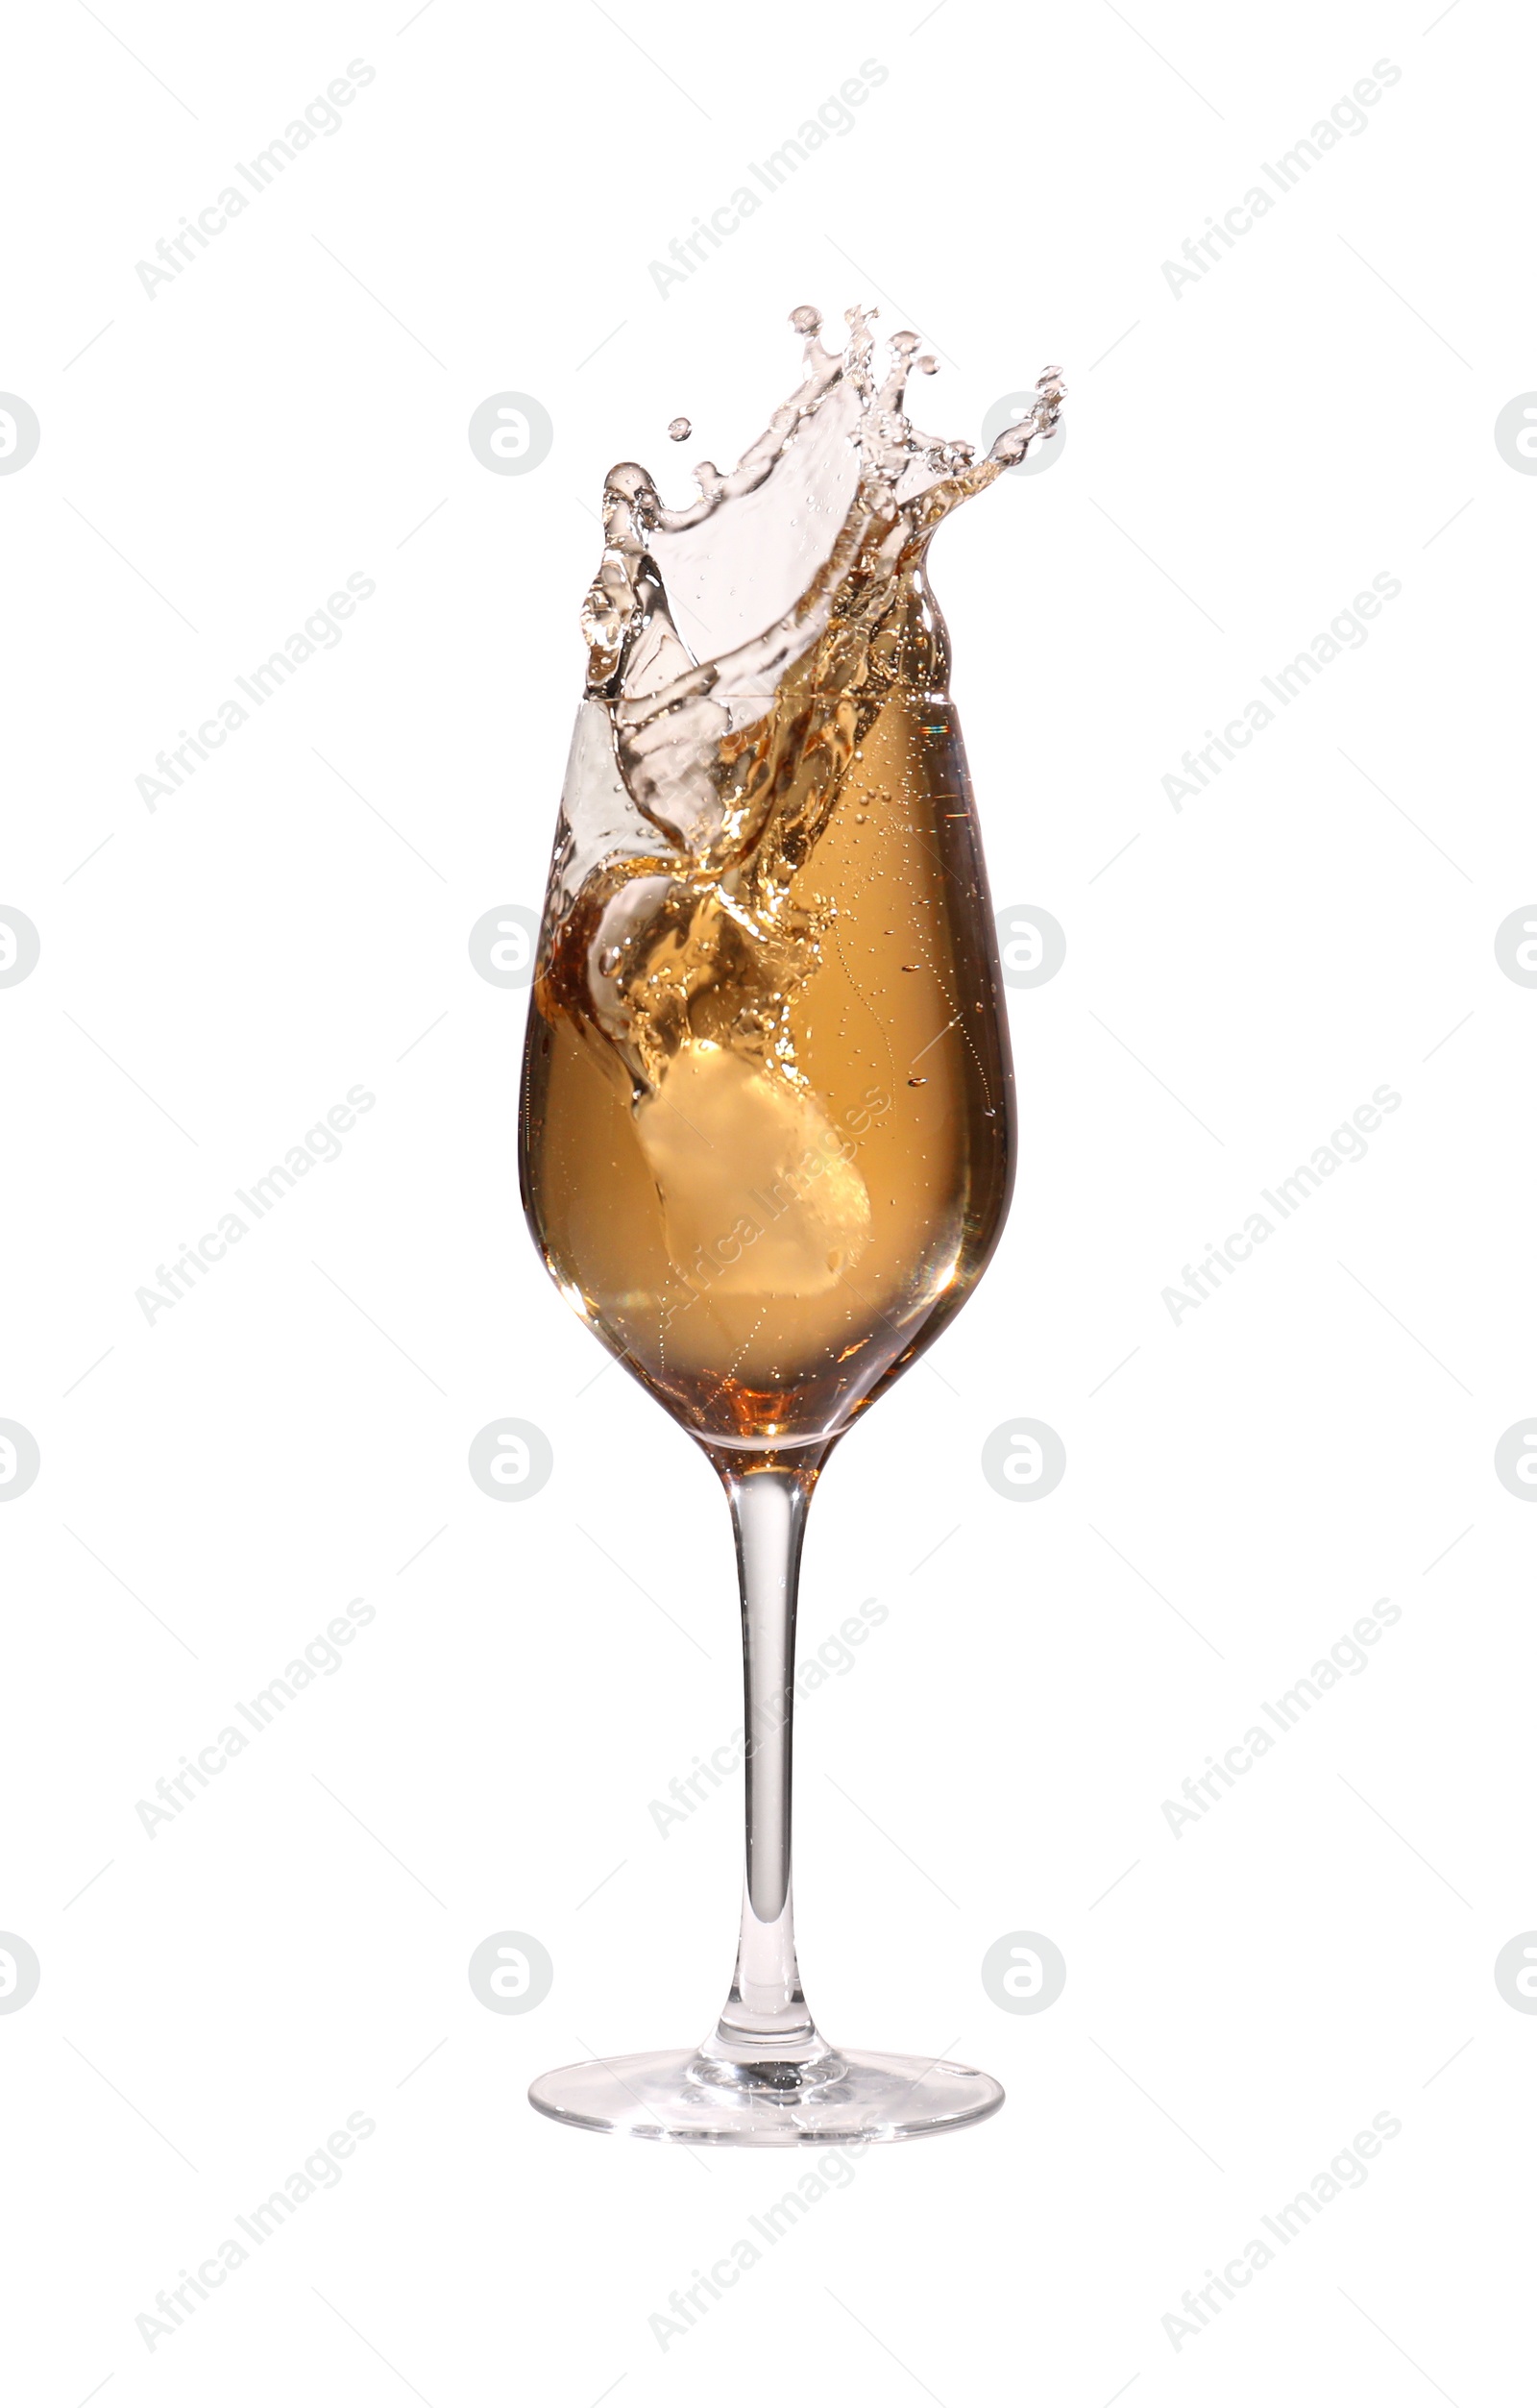 Photo of Delicious wine splashing out of glass on white background